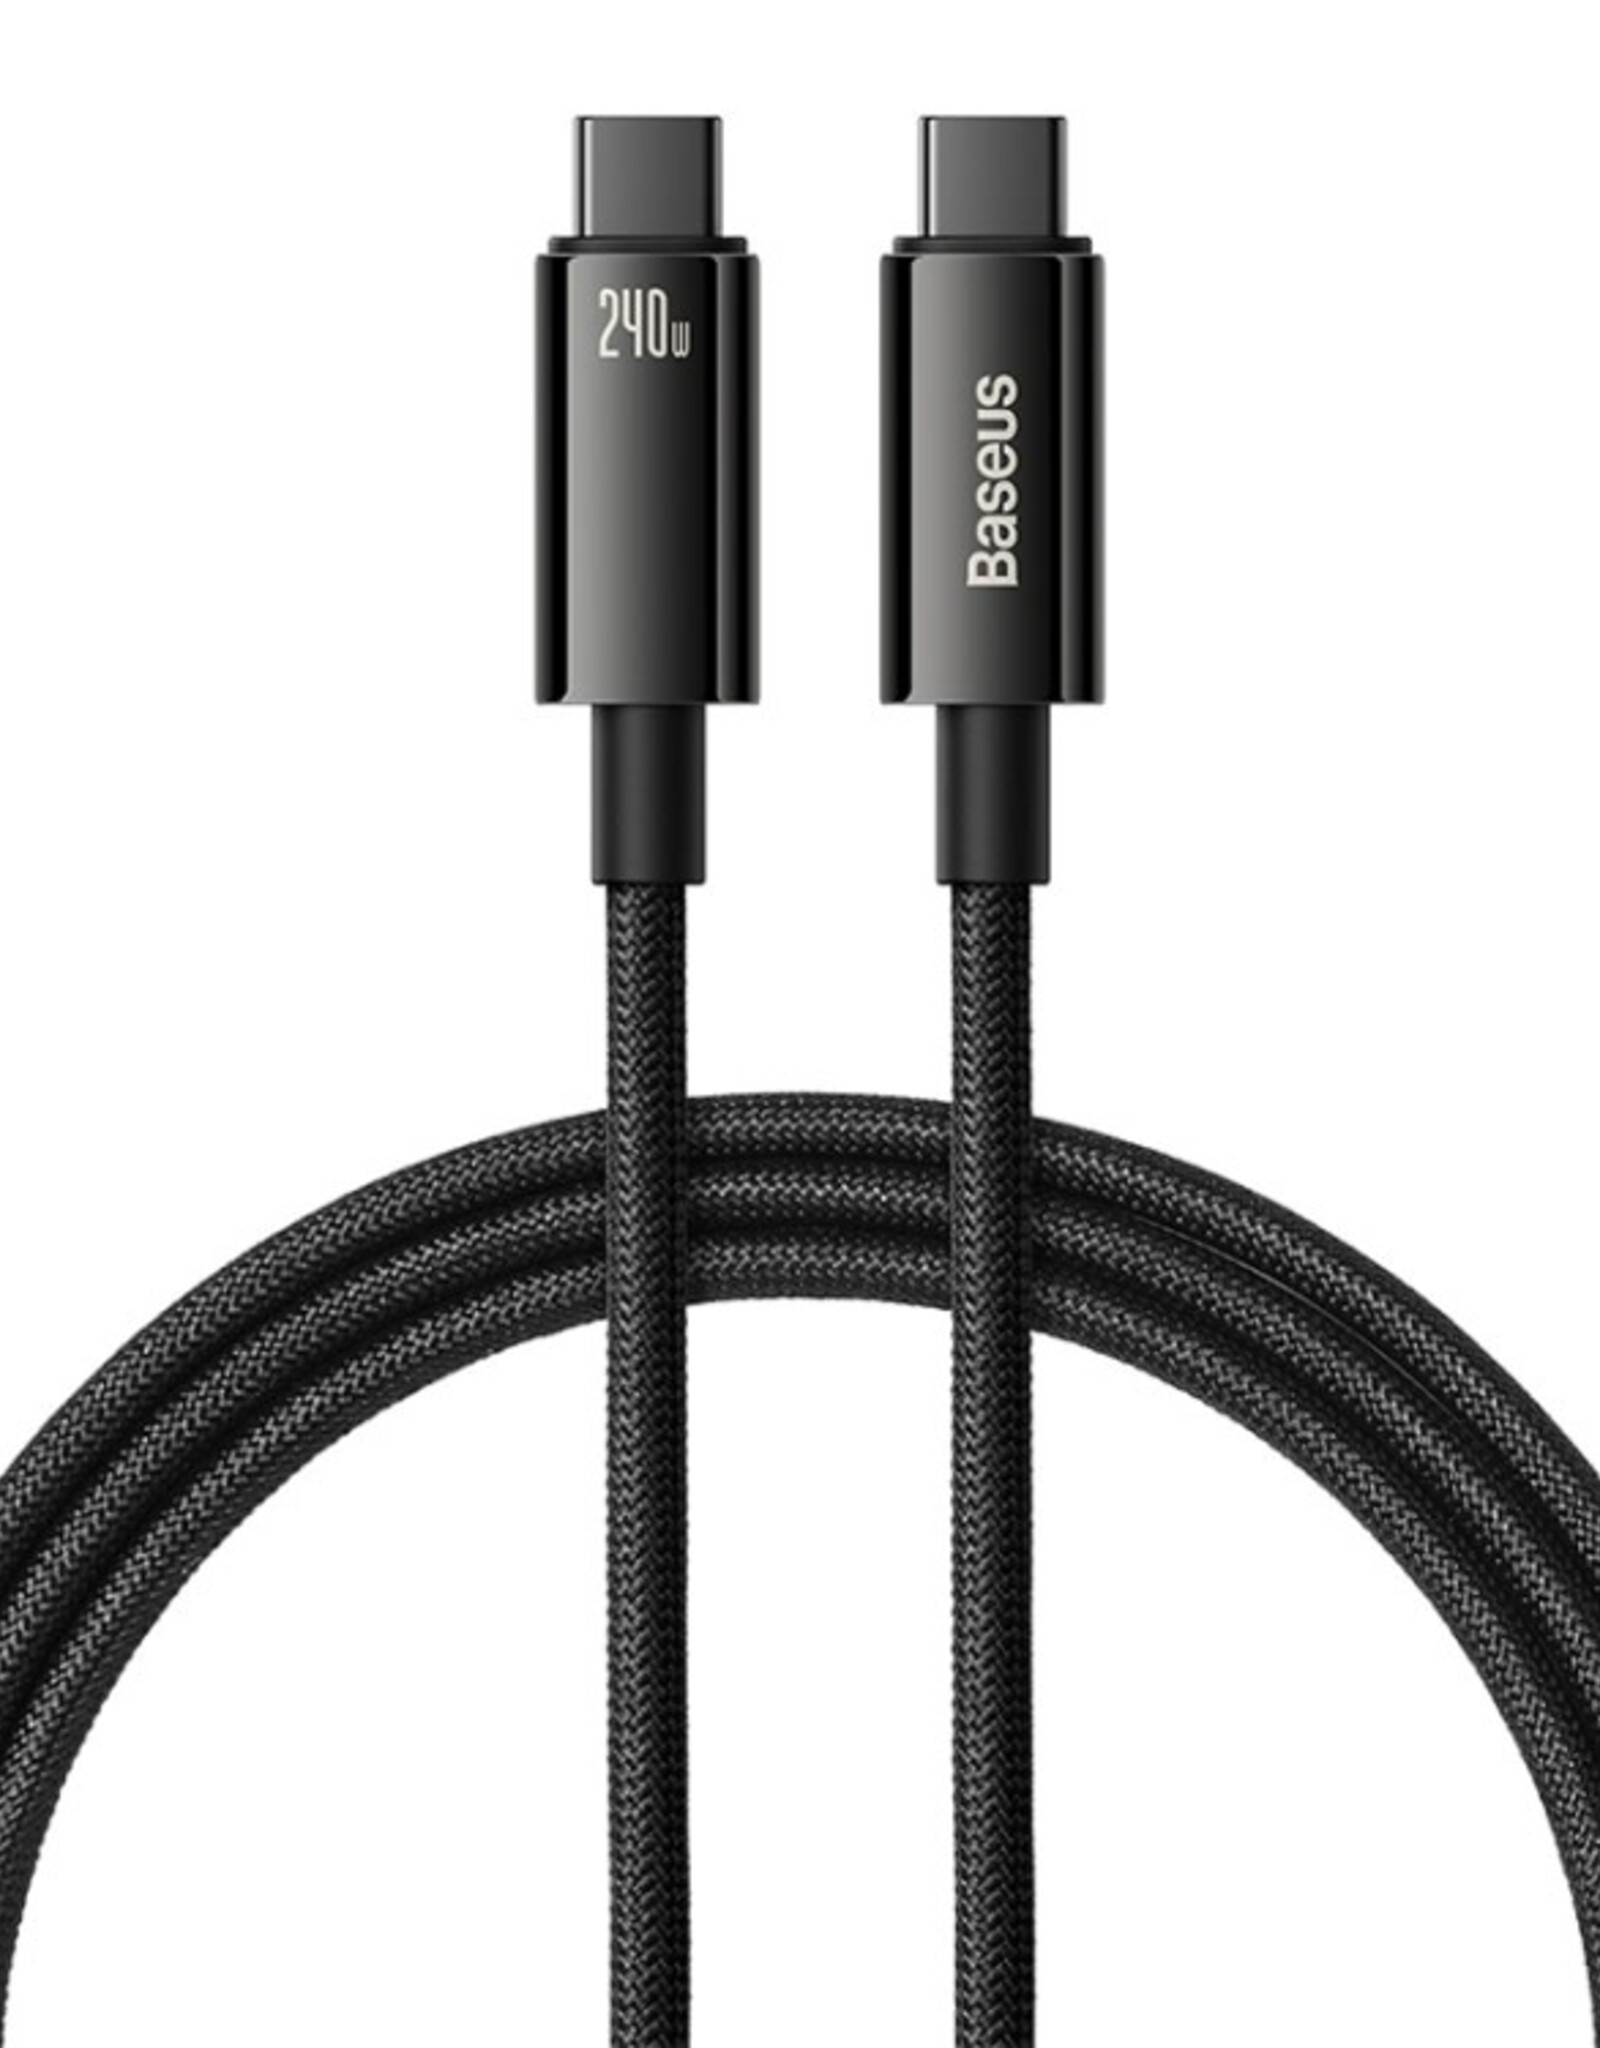 Baseus 240w Tungsten gold fast charging data cable type c to type c 2m black